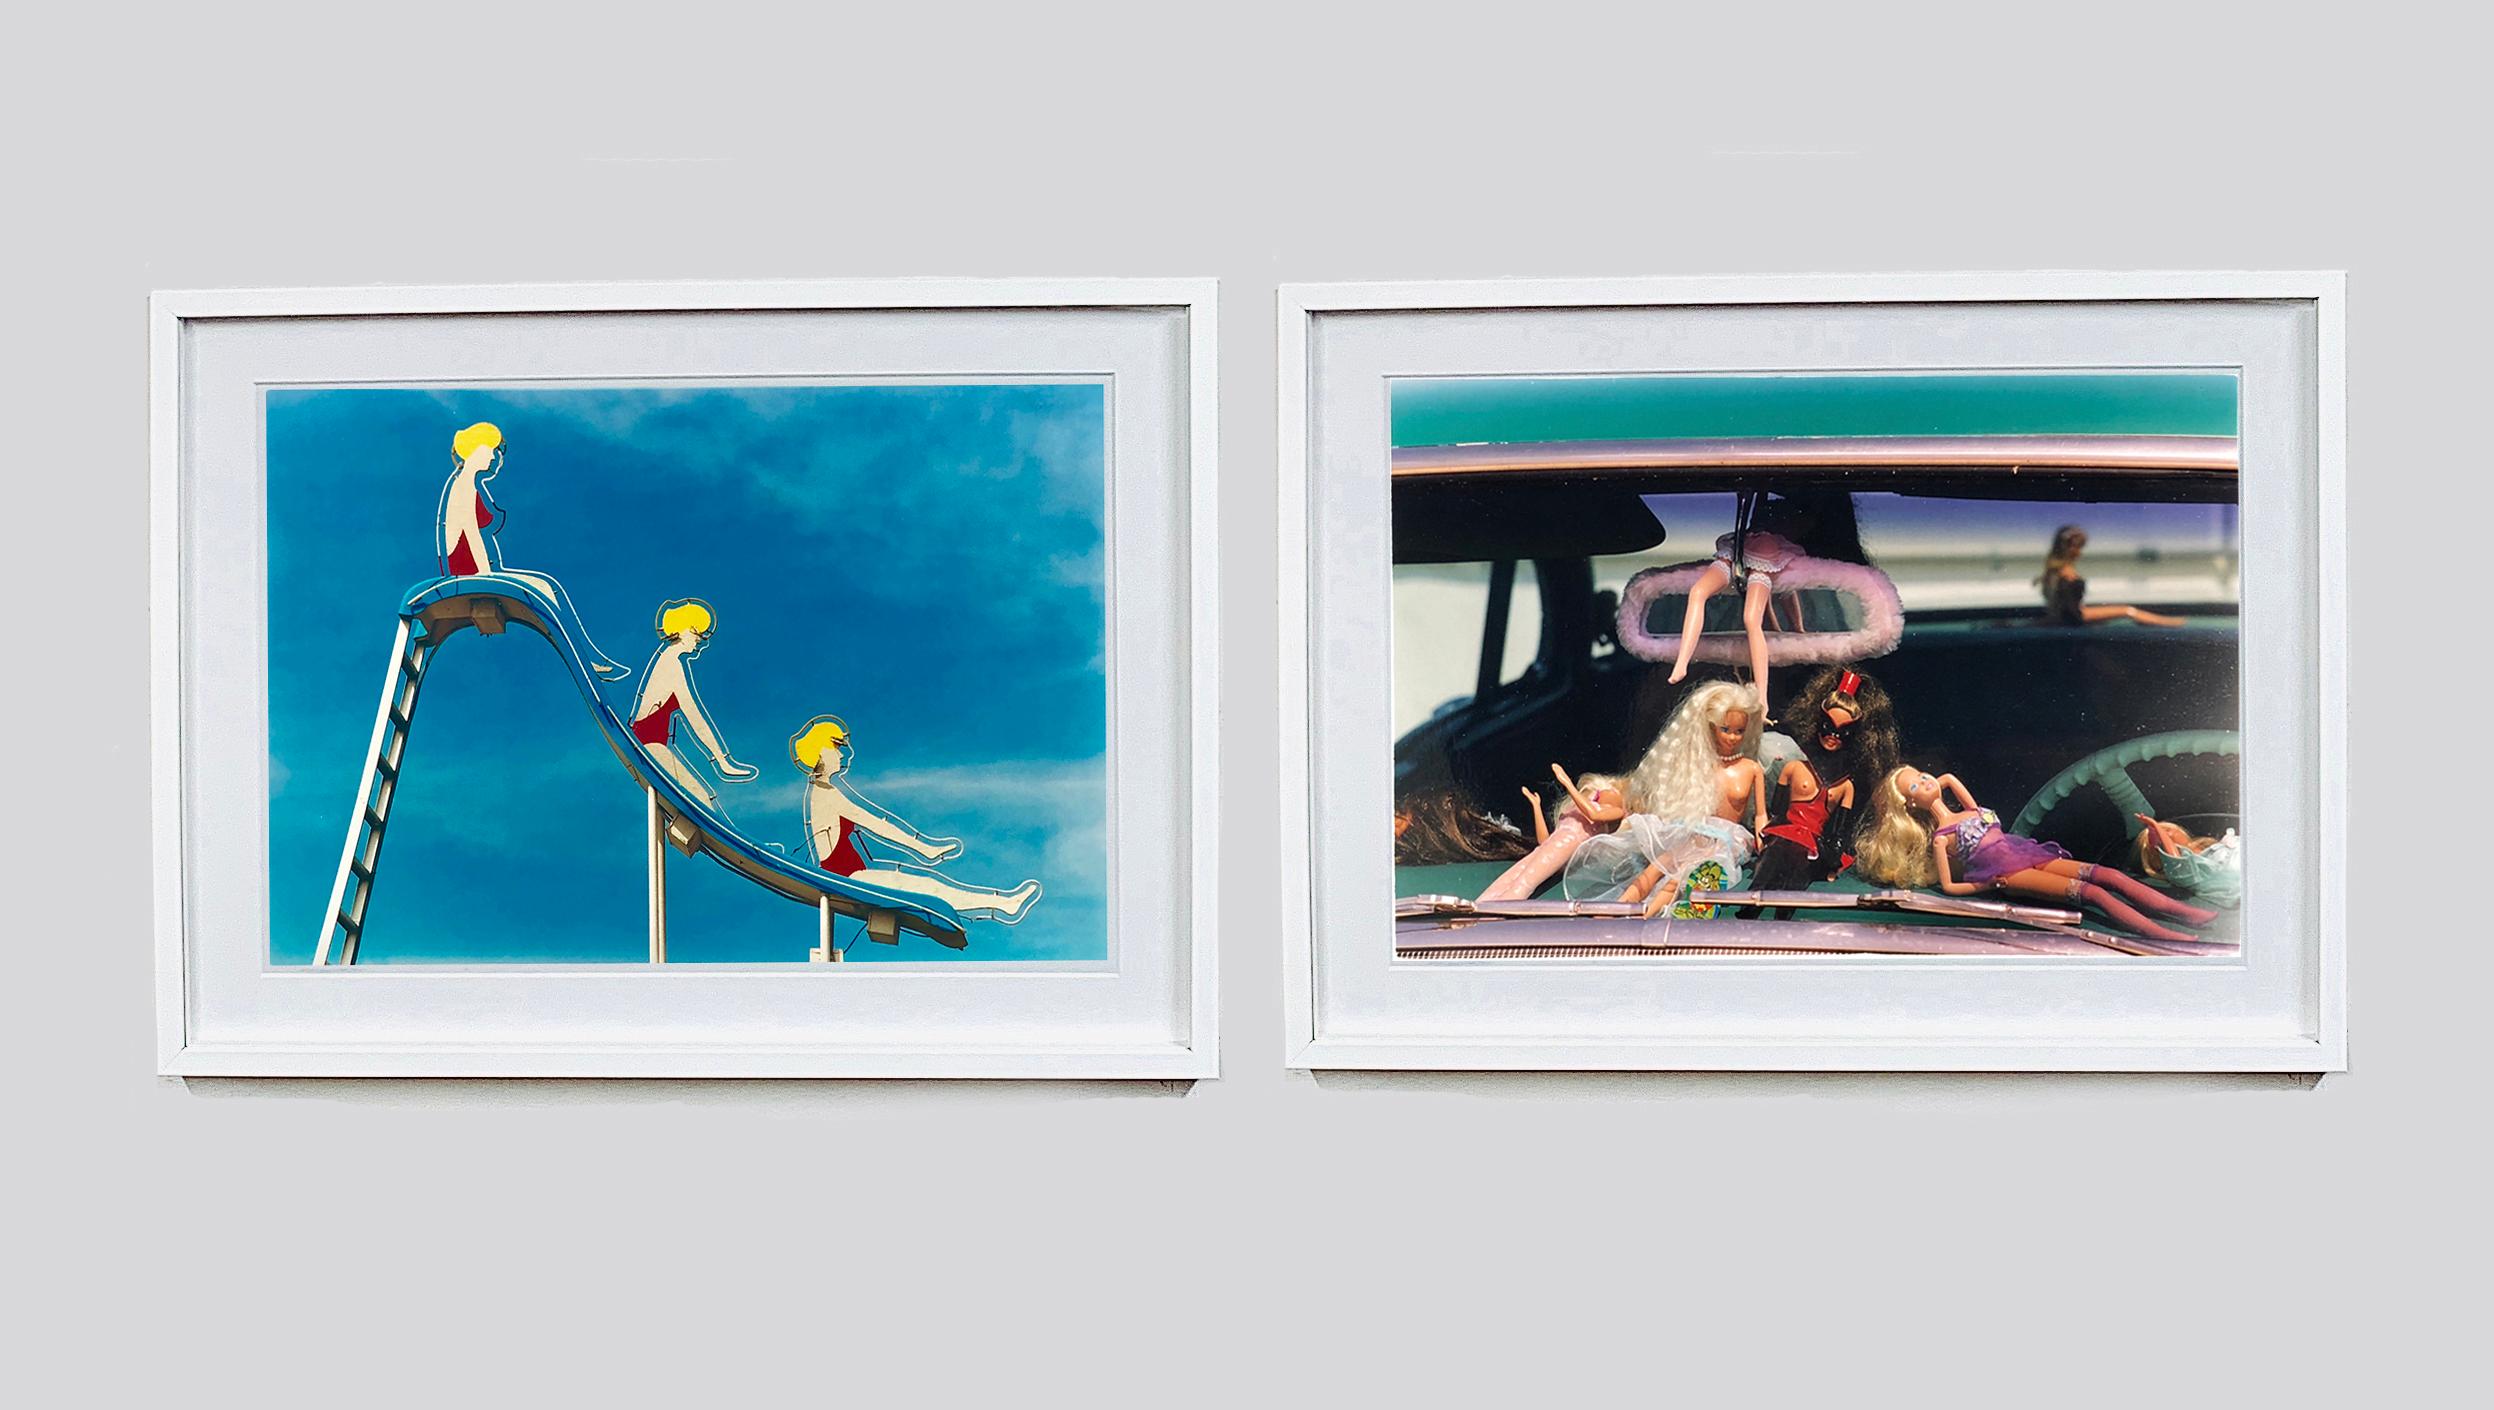 Las Vegas Pool Supplies, perfect pop-art kitsch from Richard Heeps Dream in Color series, in this American roadside 'Sign Porn' photography.

This artwork is a limited edition of 25, gloss photographic print, dry-mounted to aluminium, presented in a